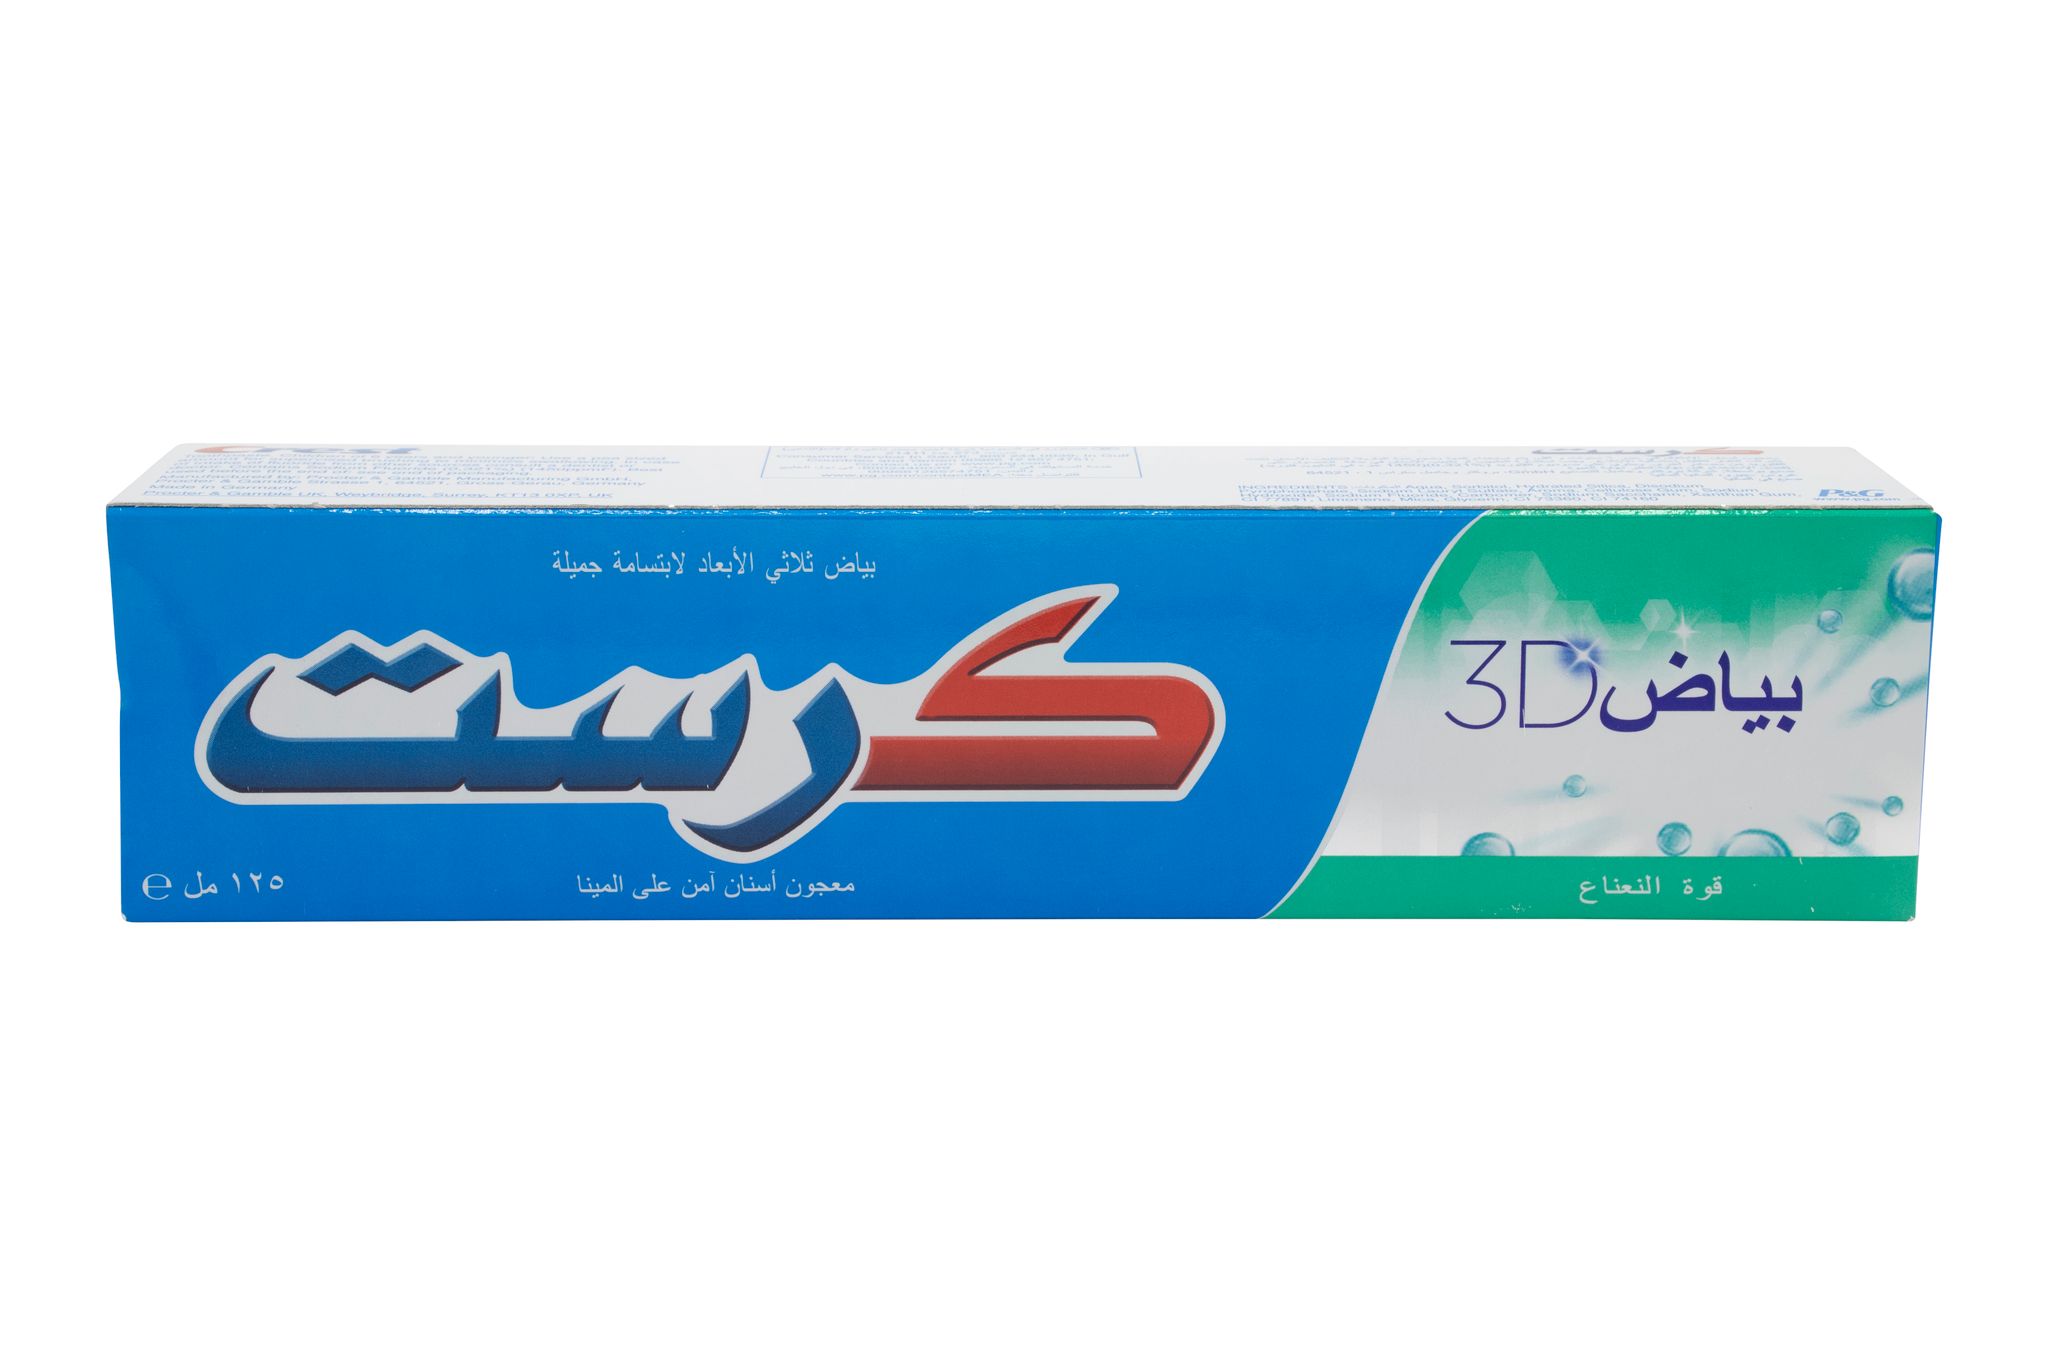 Fresh Cool Water Toothpaste 125 Ml